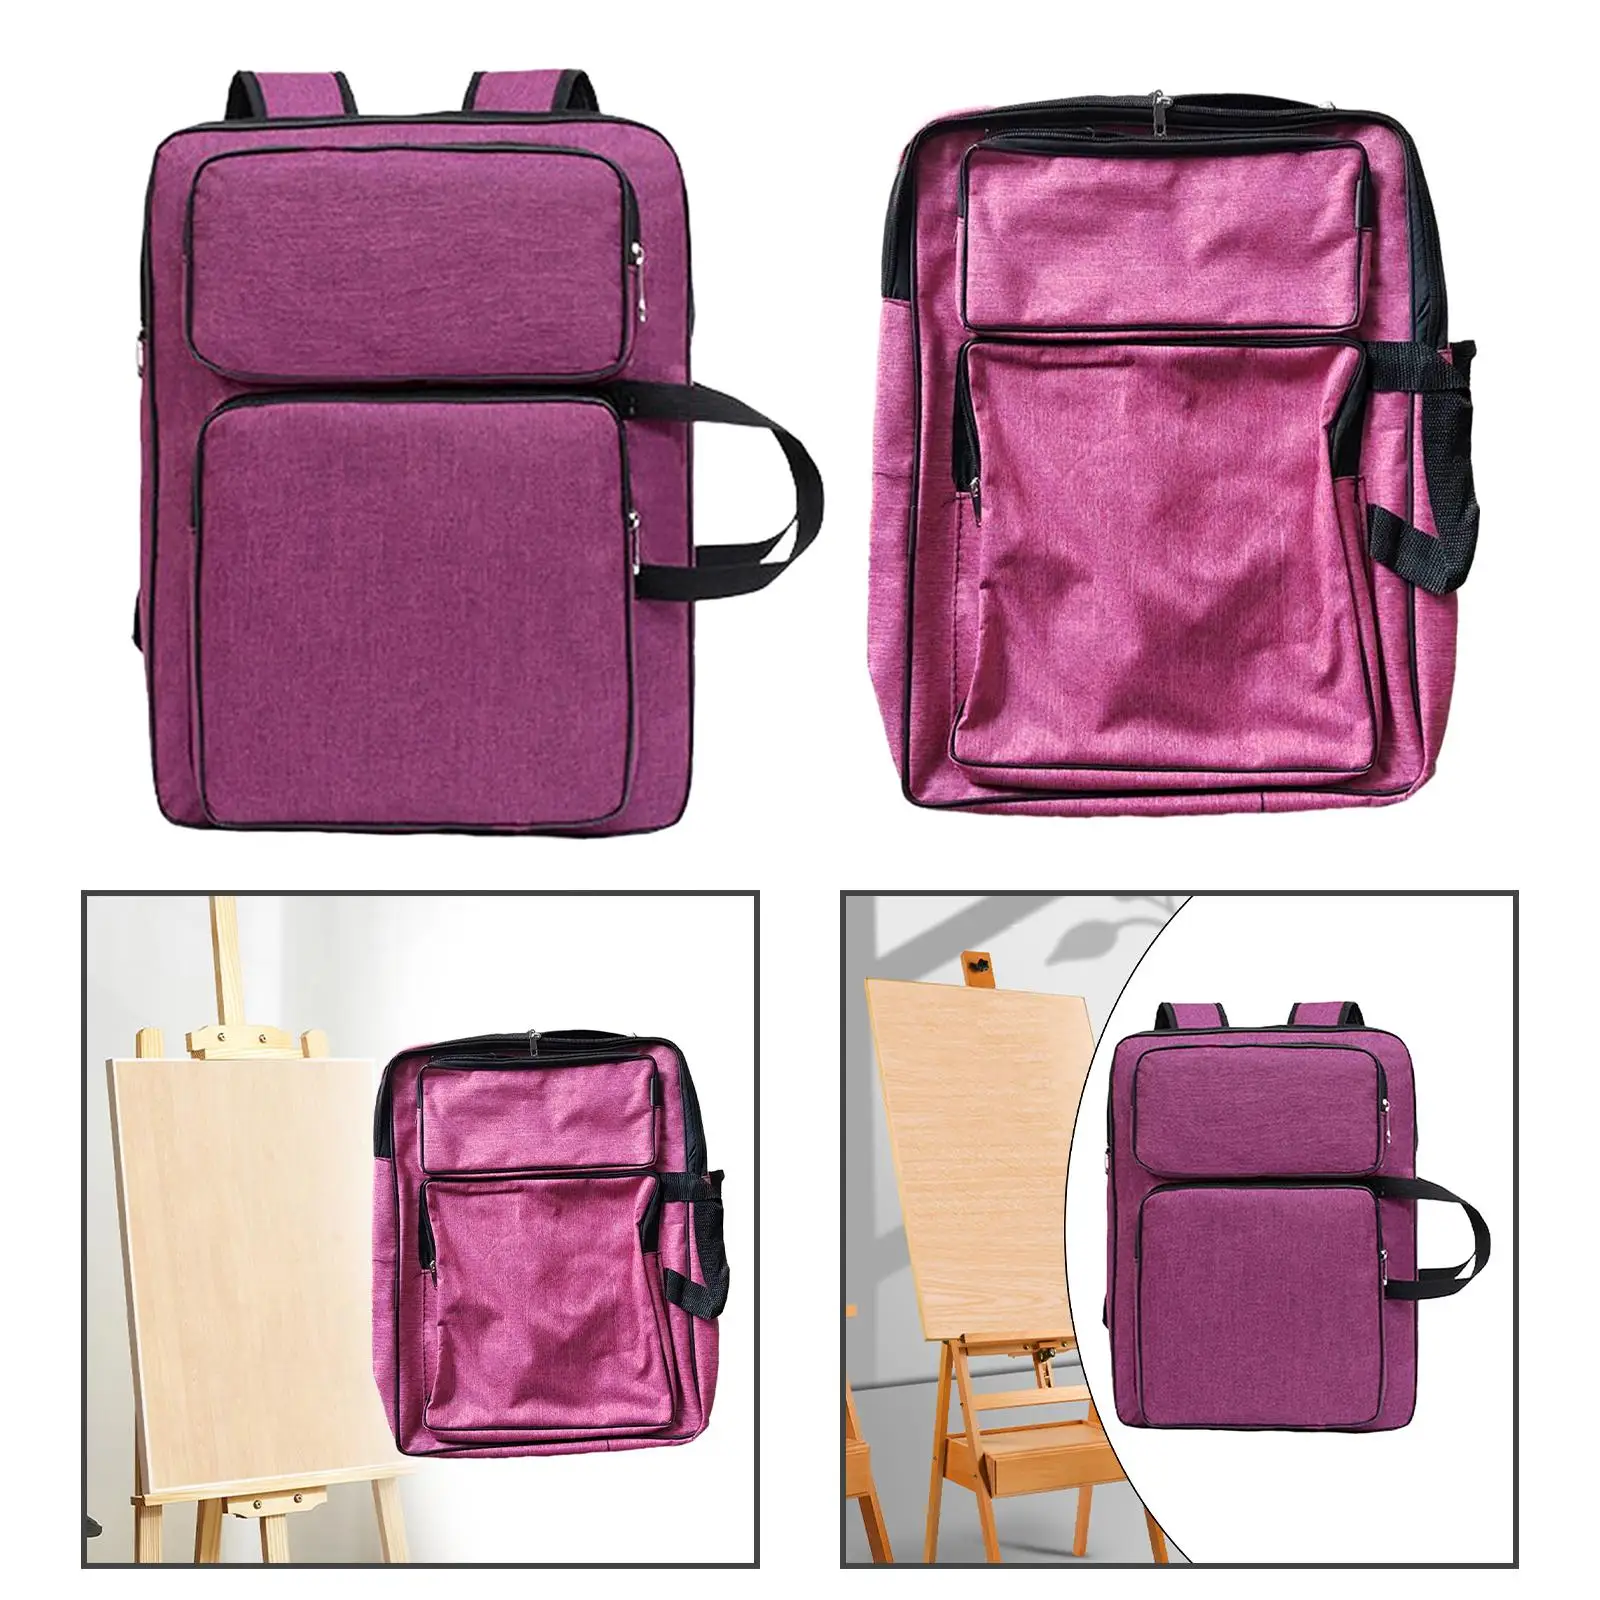 Art Portfolio Case Portable Carrying Bag Artists Backpack for Cleaning Pot Palette Display Screen Painting Tool Sketch Books